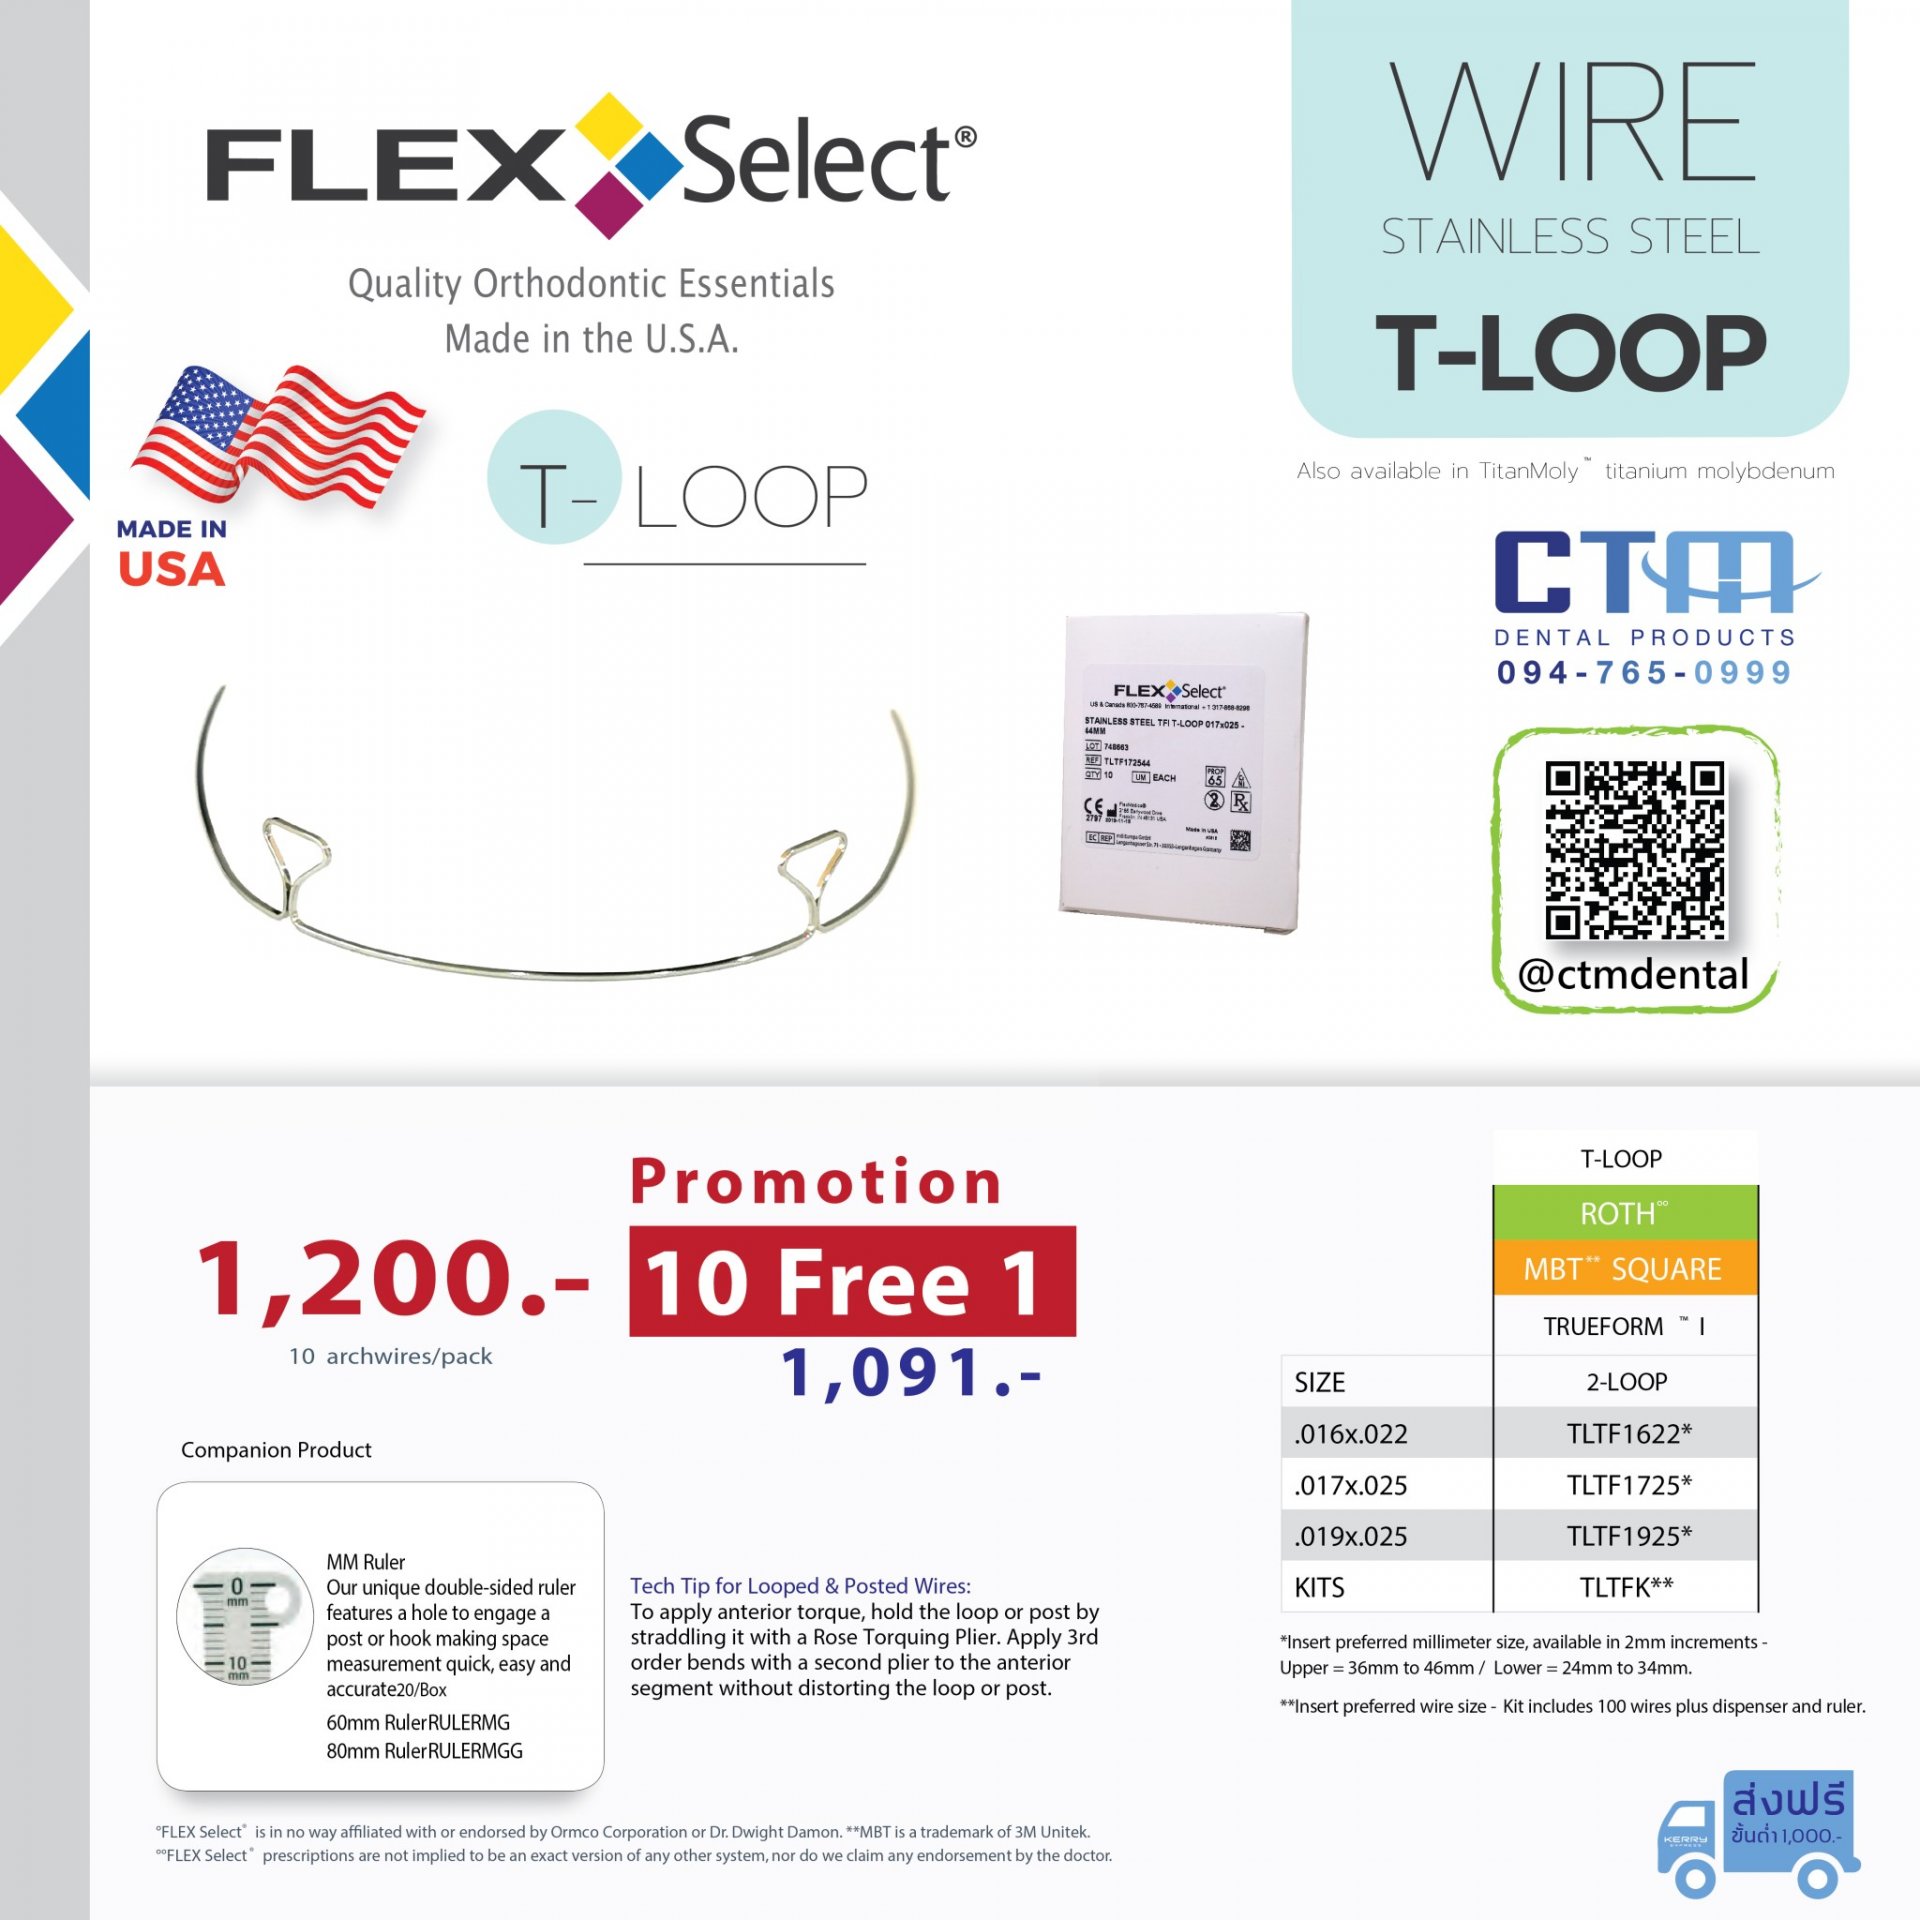 FLEX SELECT WIRE STAINLESS STEEL T-LOOP